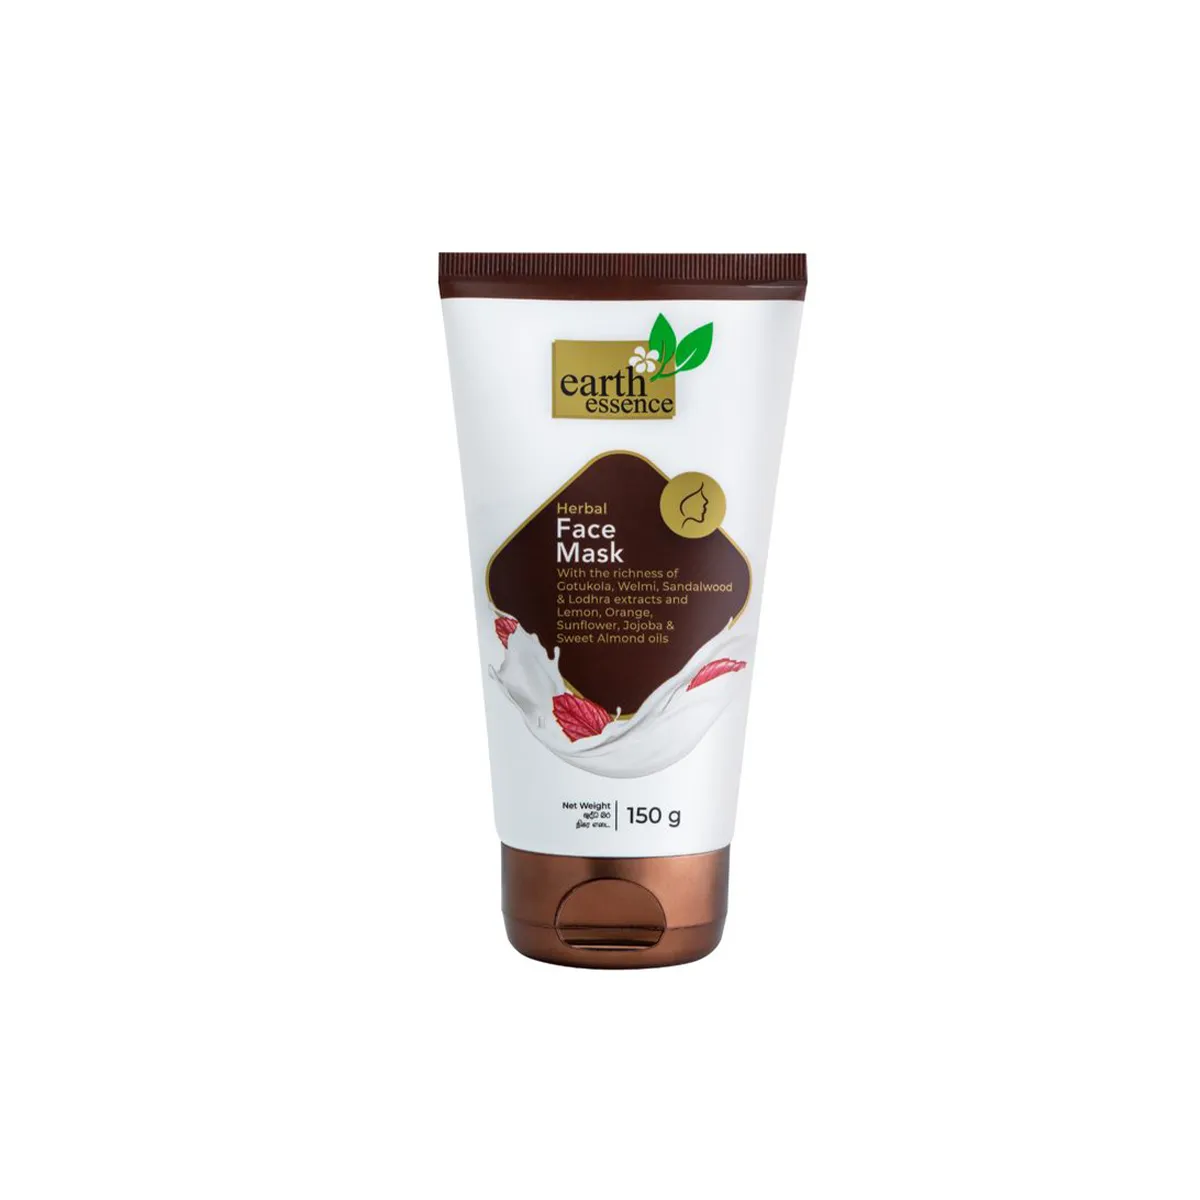 Earth Essence Herbal Face Mask 150g